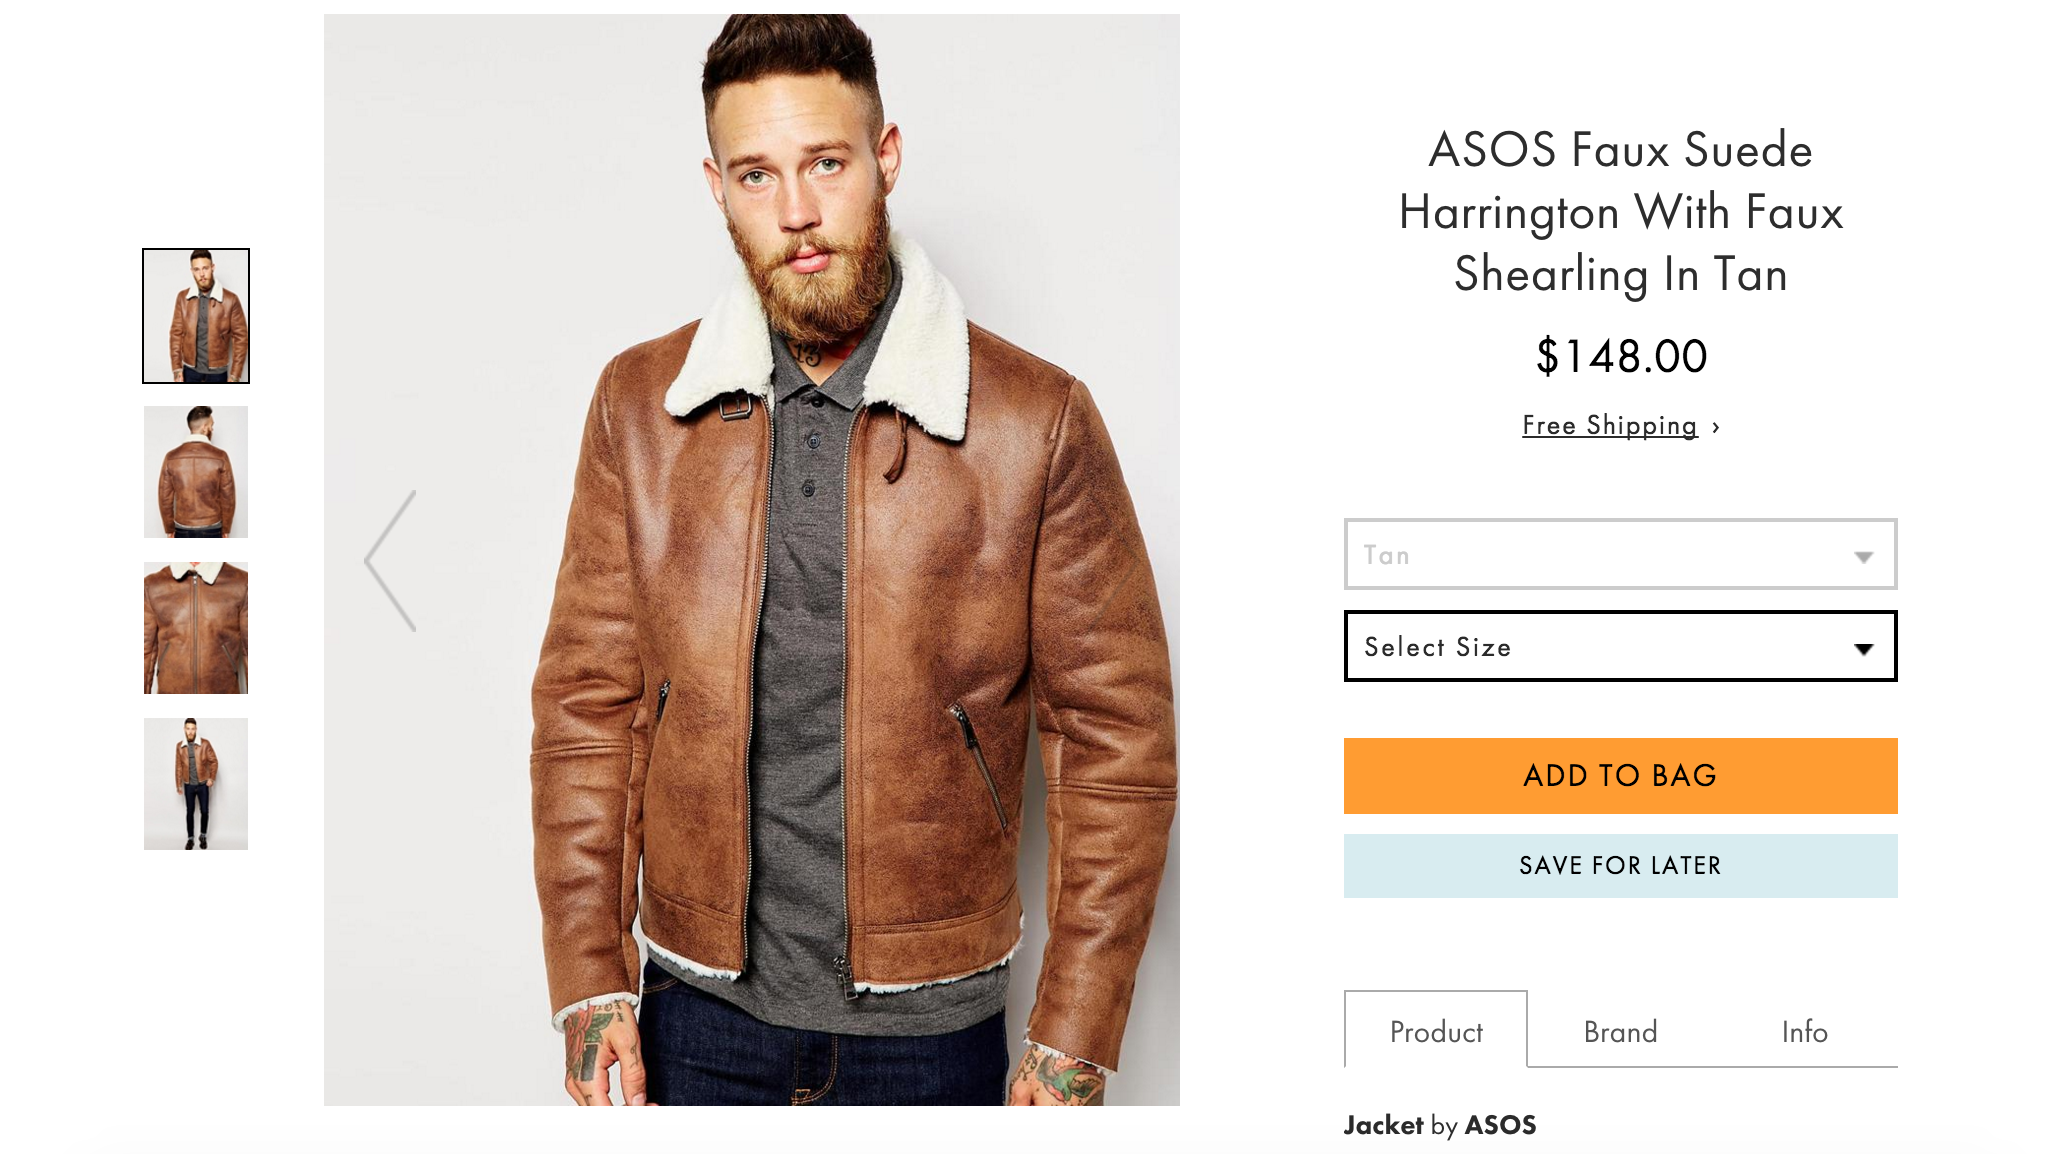 image source: http://www.asos.com/au/ASOS/ASOS-Faux-Suede-Harrington-With-Faux-Shearling-In-Tan/Prod/pgeproduct.aspx?iid=5243690&cid=3606&Rf989=4998&sh=0&pge=0&pgesize=36&sort=-1&clr=Tan&totalstyles=169&gridsize=3